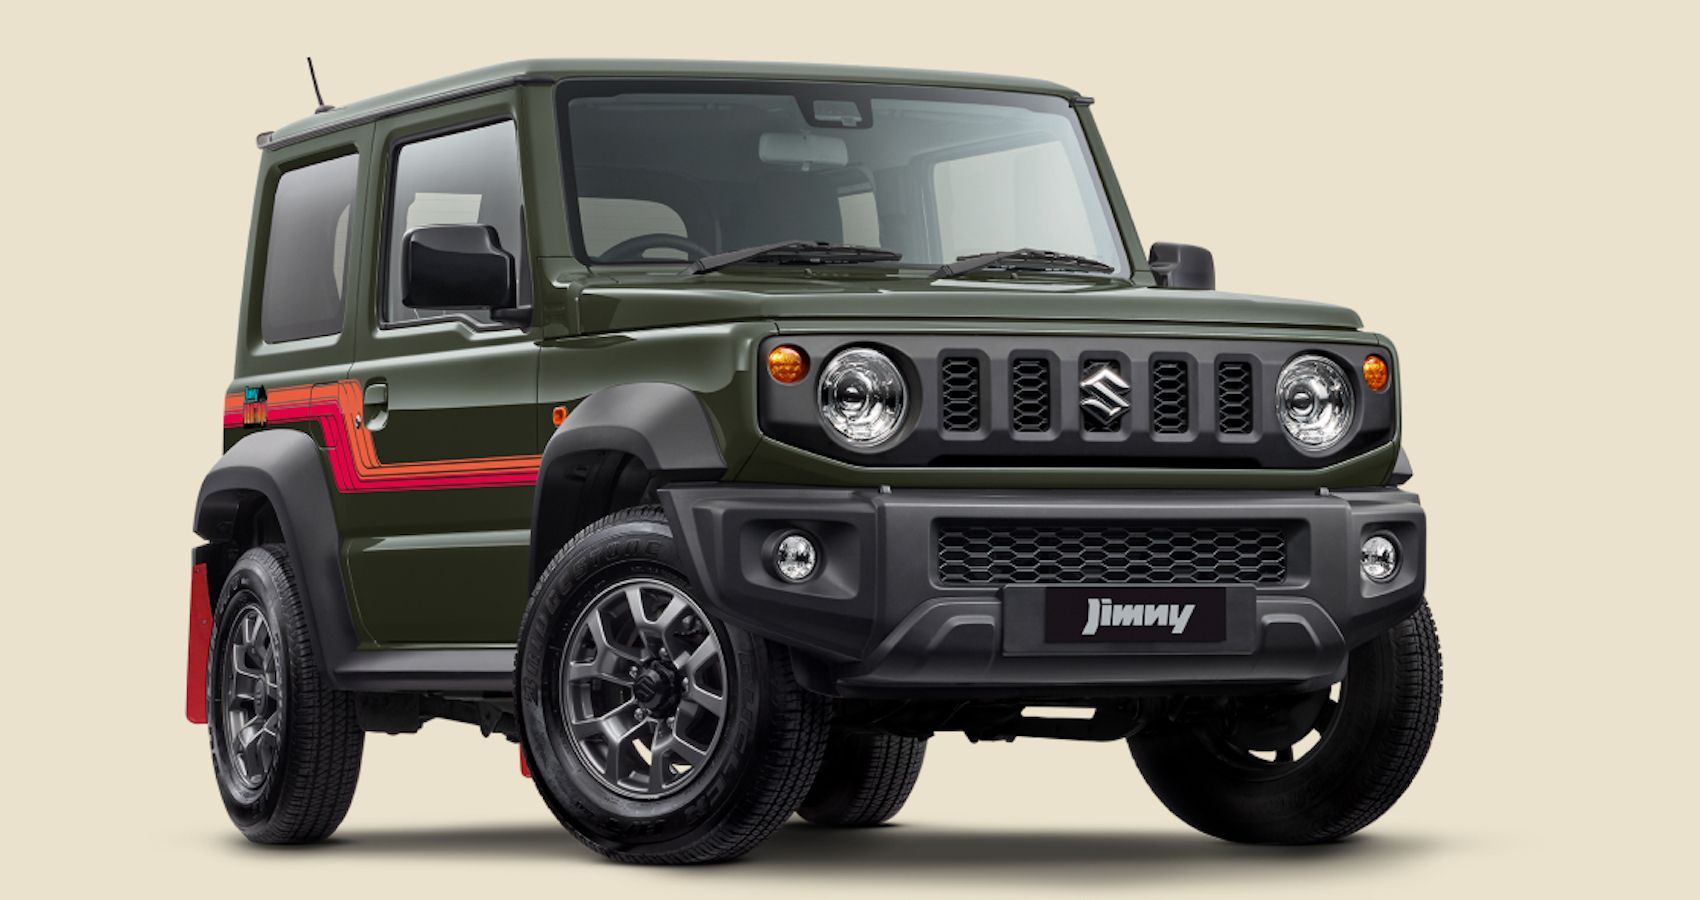 This Suzuki Jimny Limited Edition Wants To Hurt Americans With Nostalgia